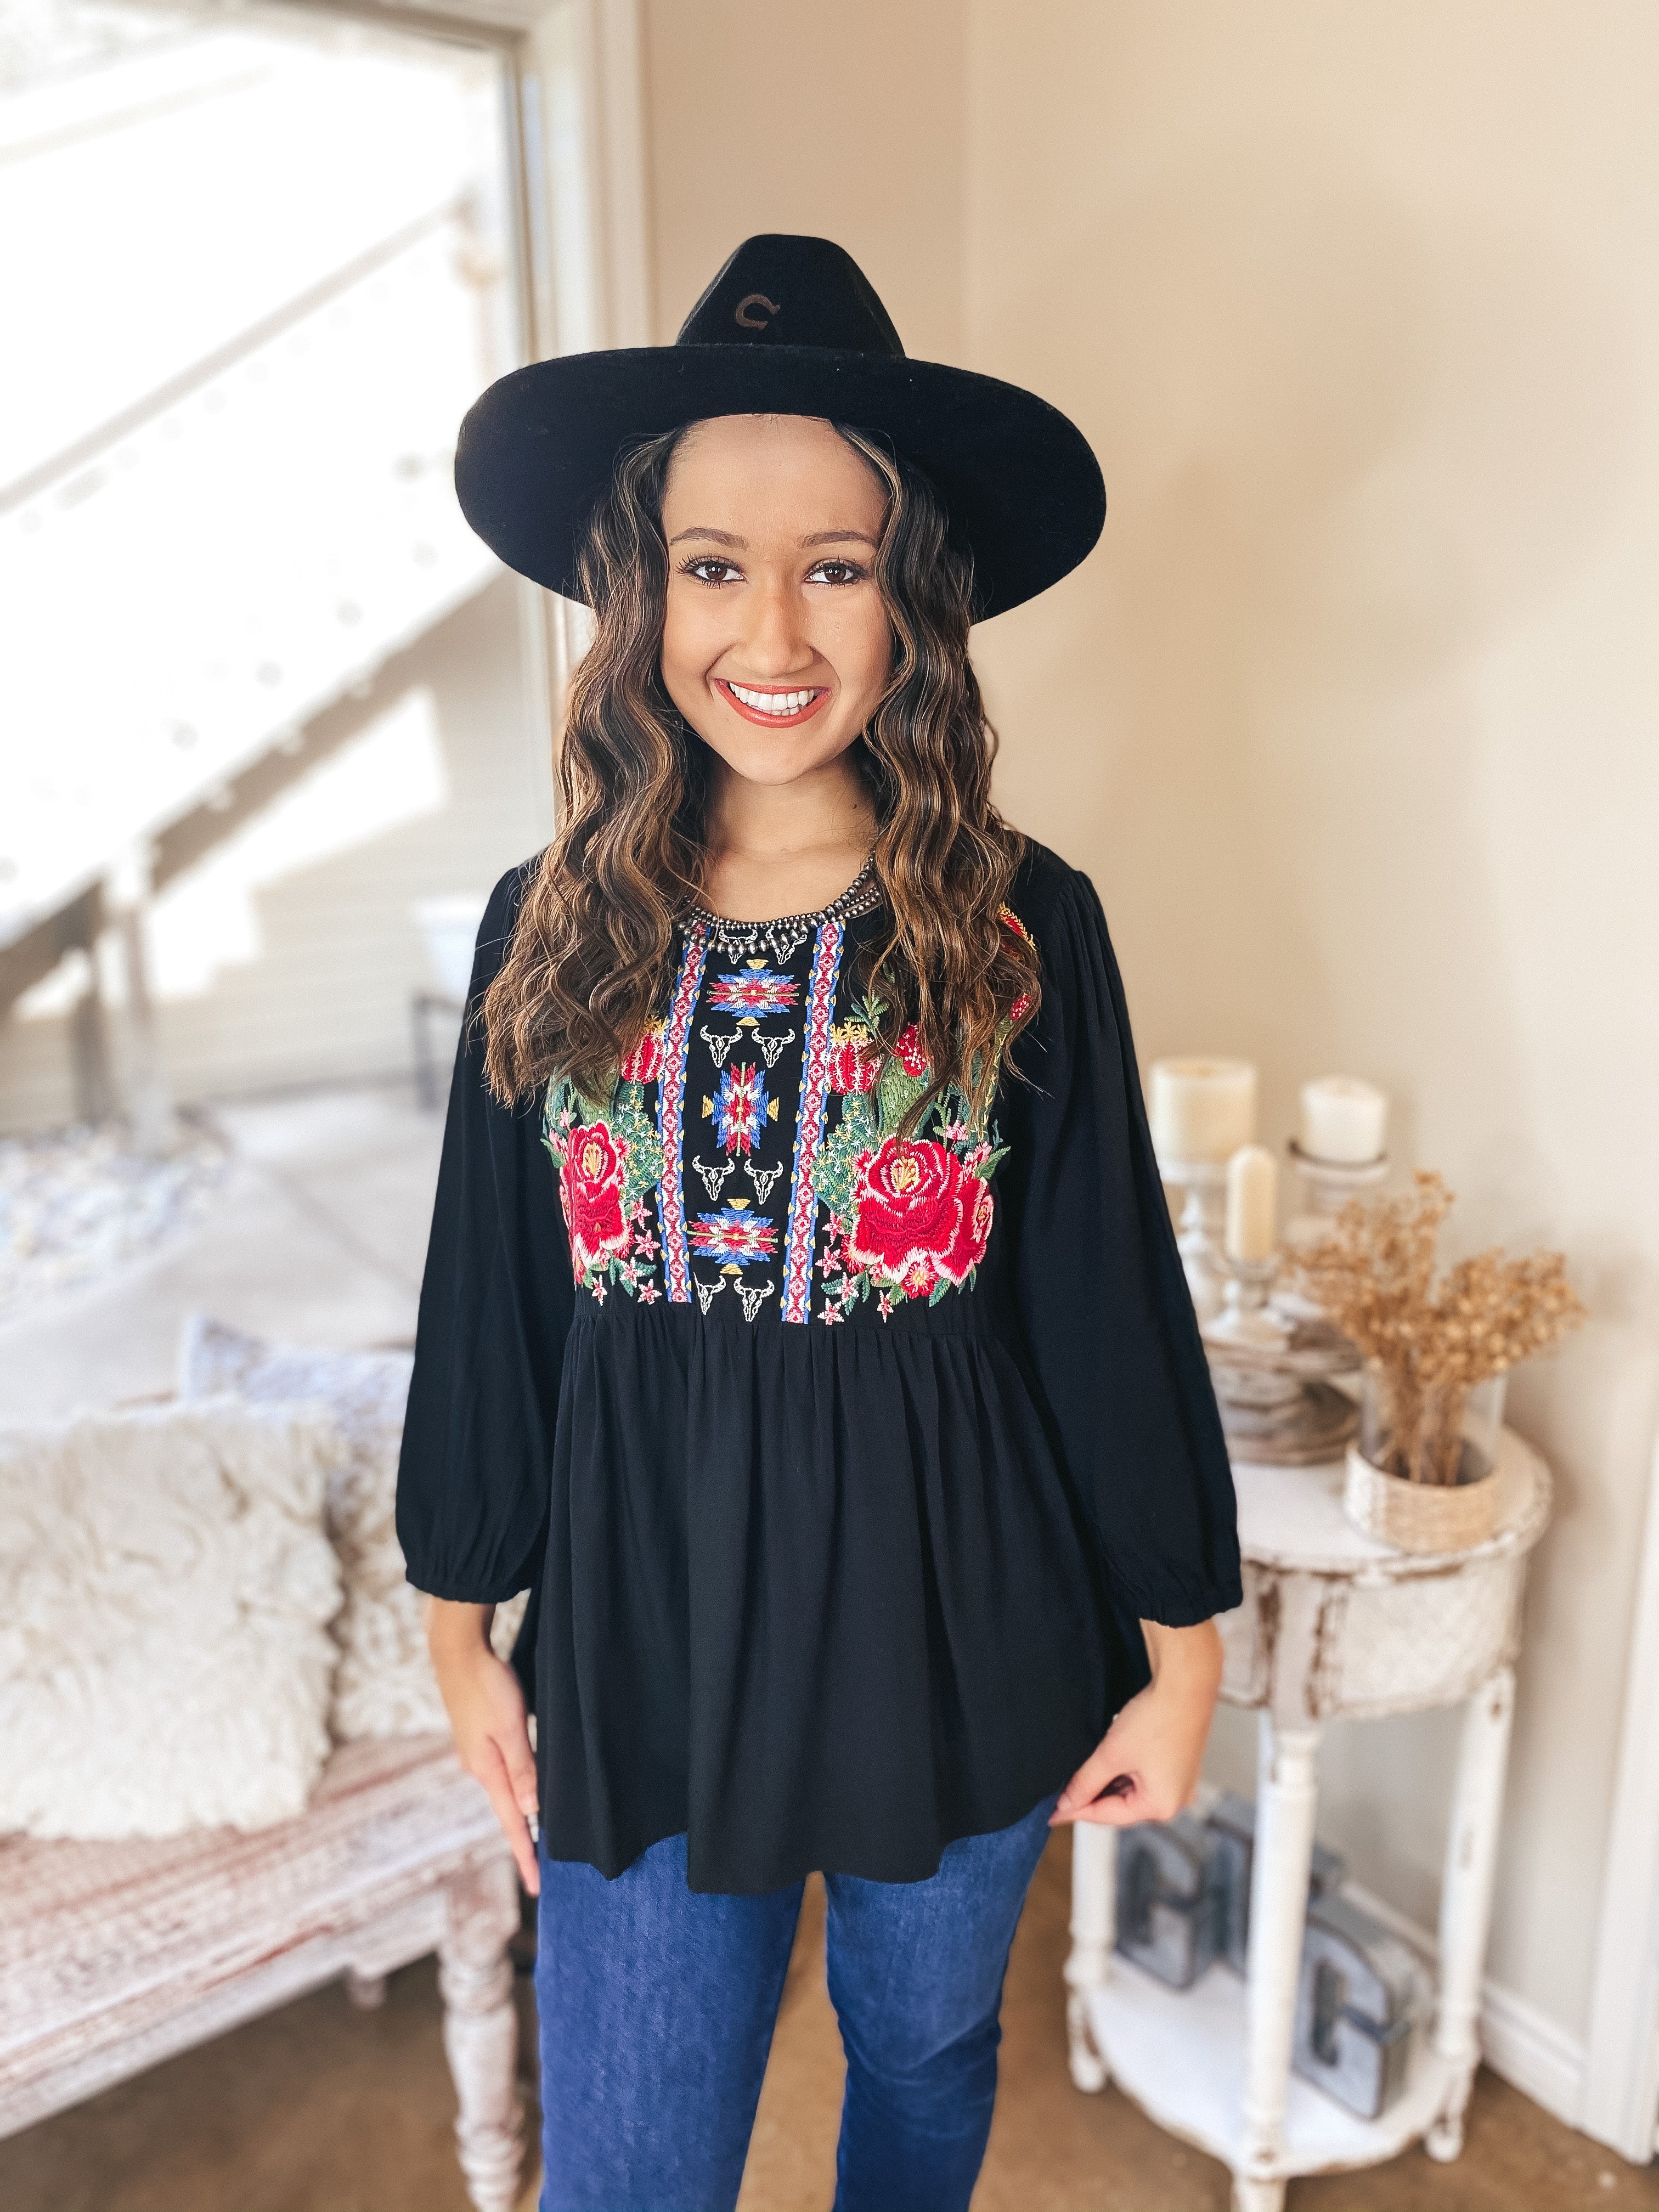 Further South Floral Cactus Embroidered Long Sleeve Babydoll Top in Black - Giddy Up Glamour Boutique